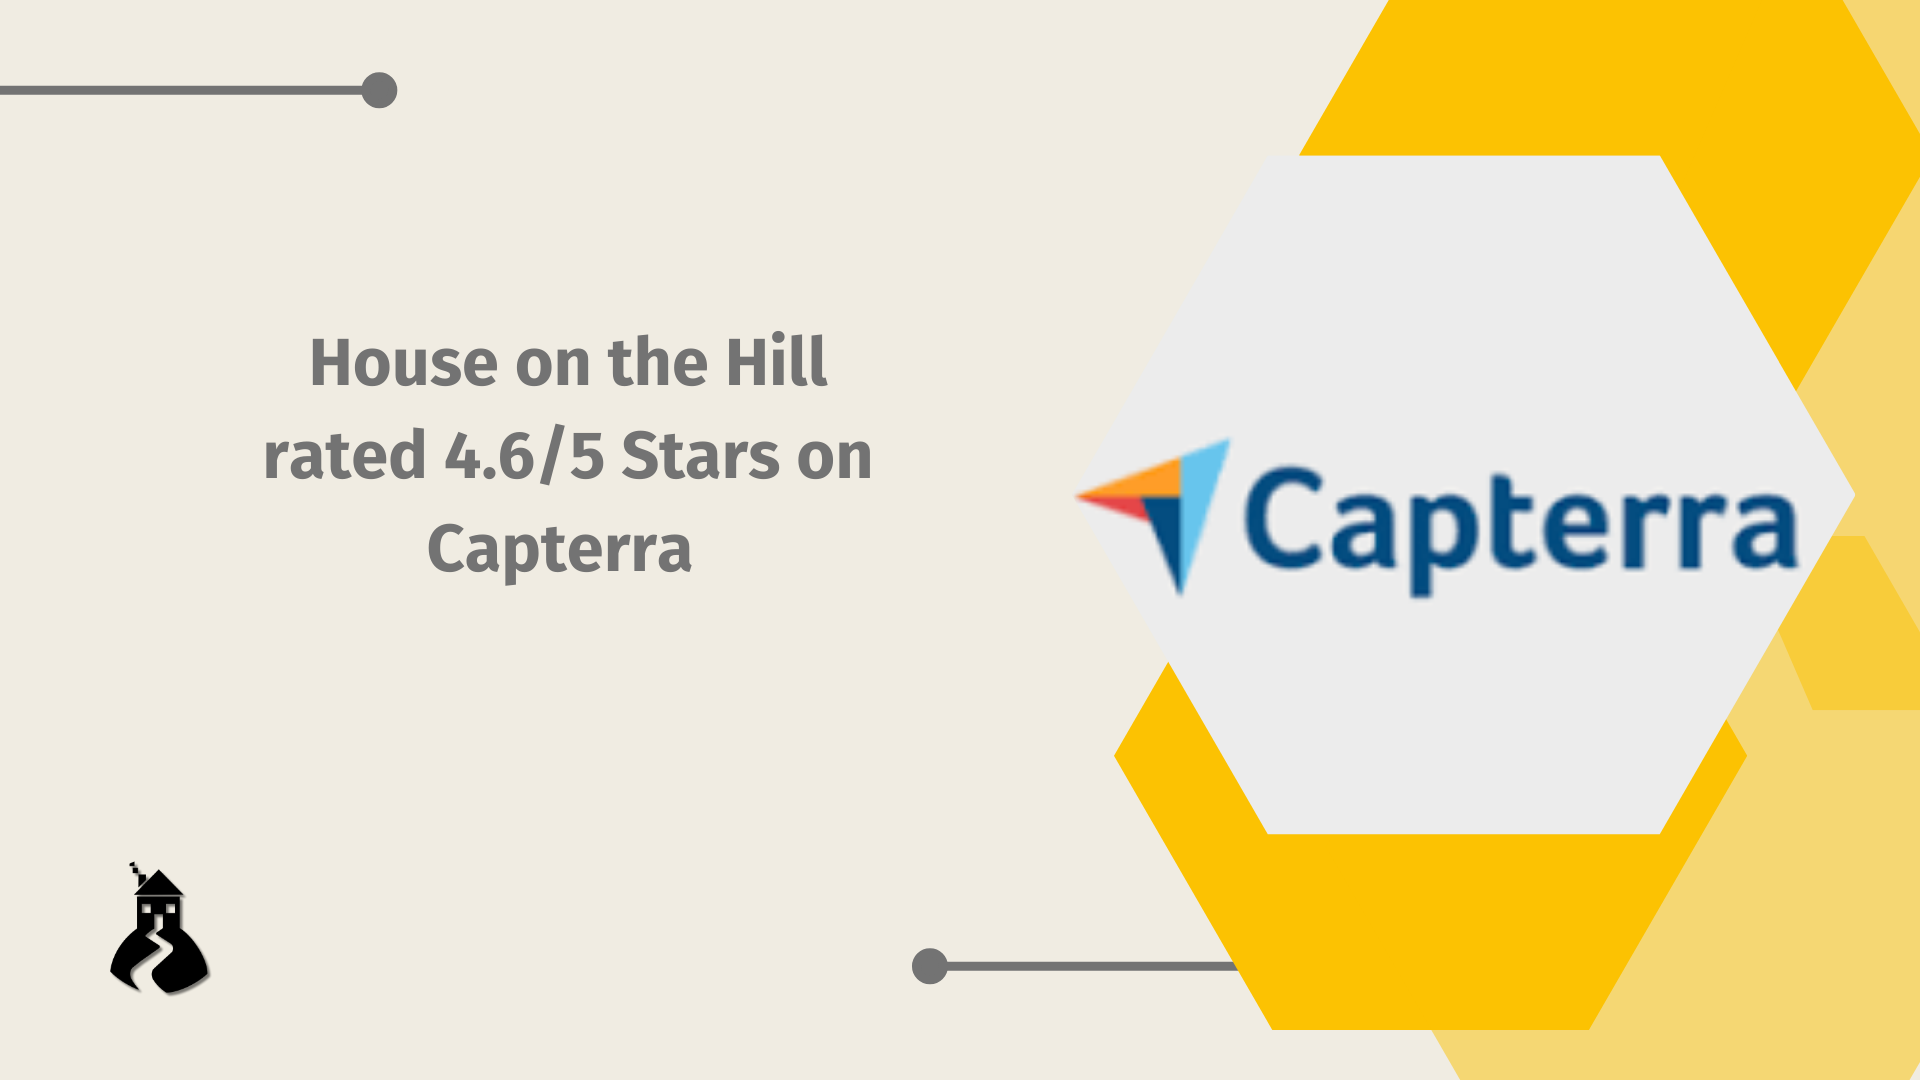 House on the Hill rated 4.6/5 Stars on Capterra